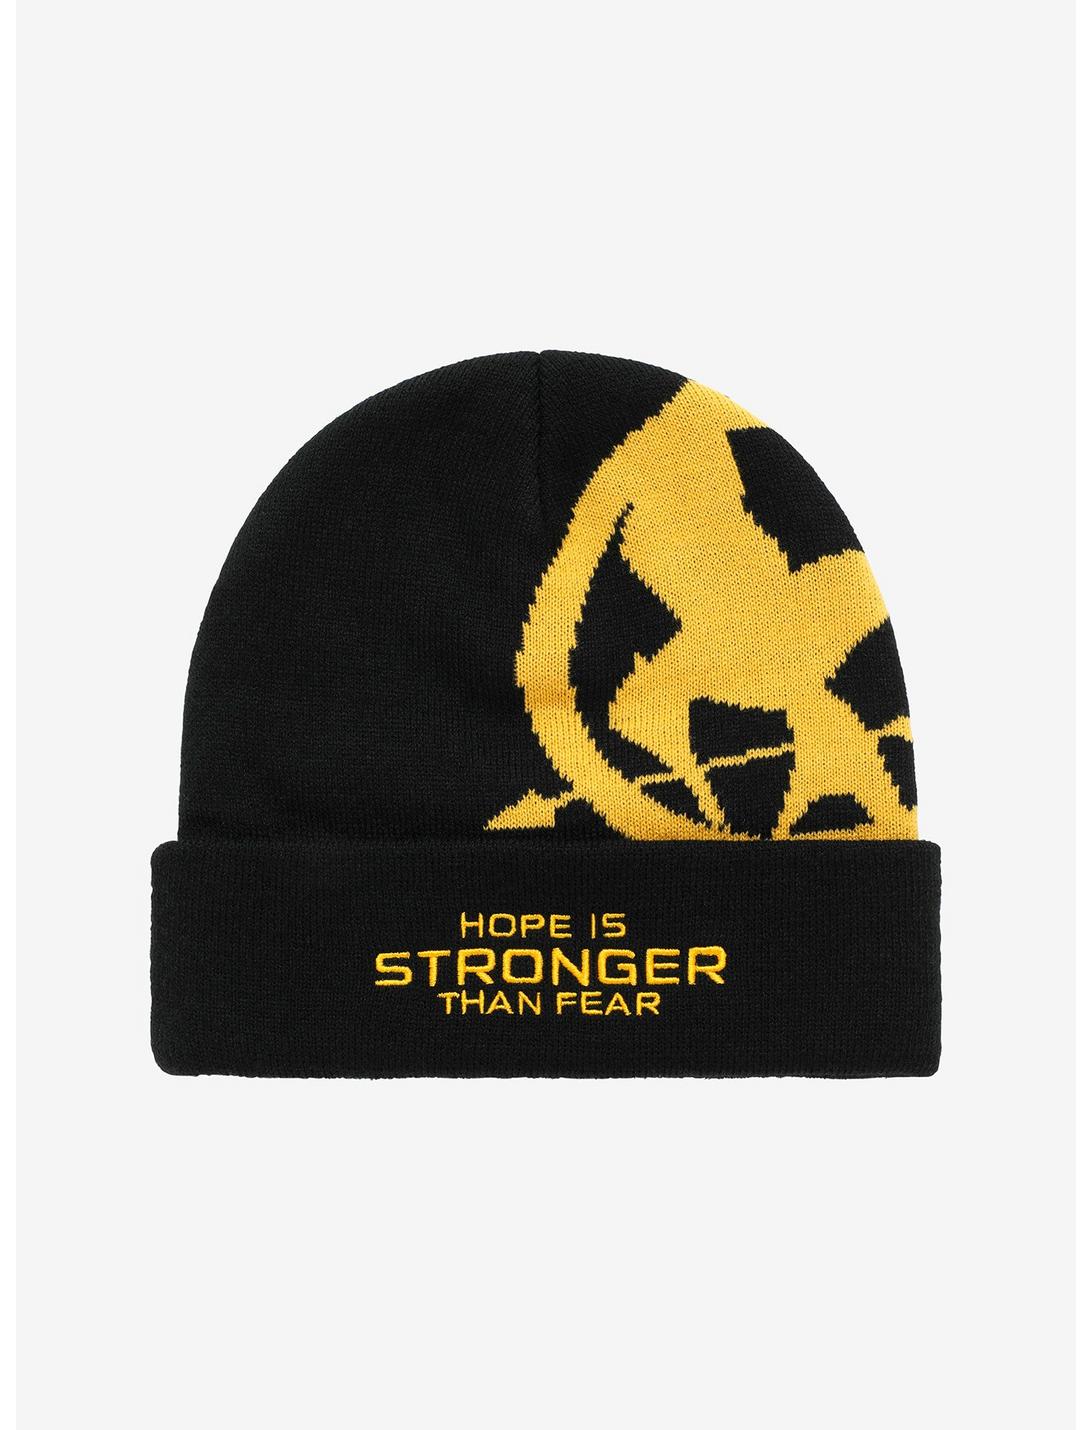 The Hunger Games Mocking Jay Beanie, , hi-res